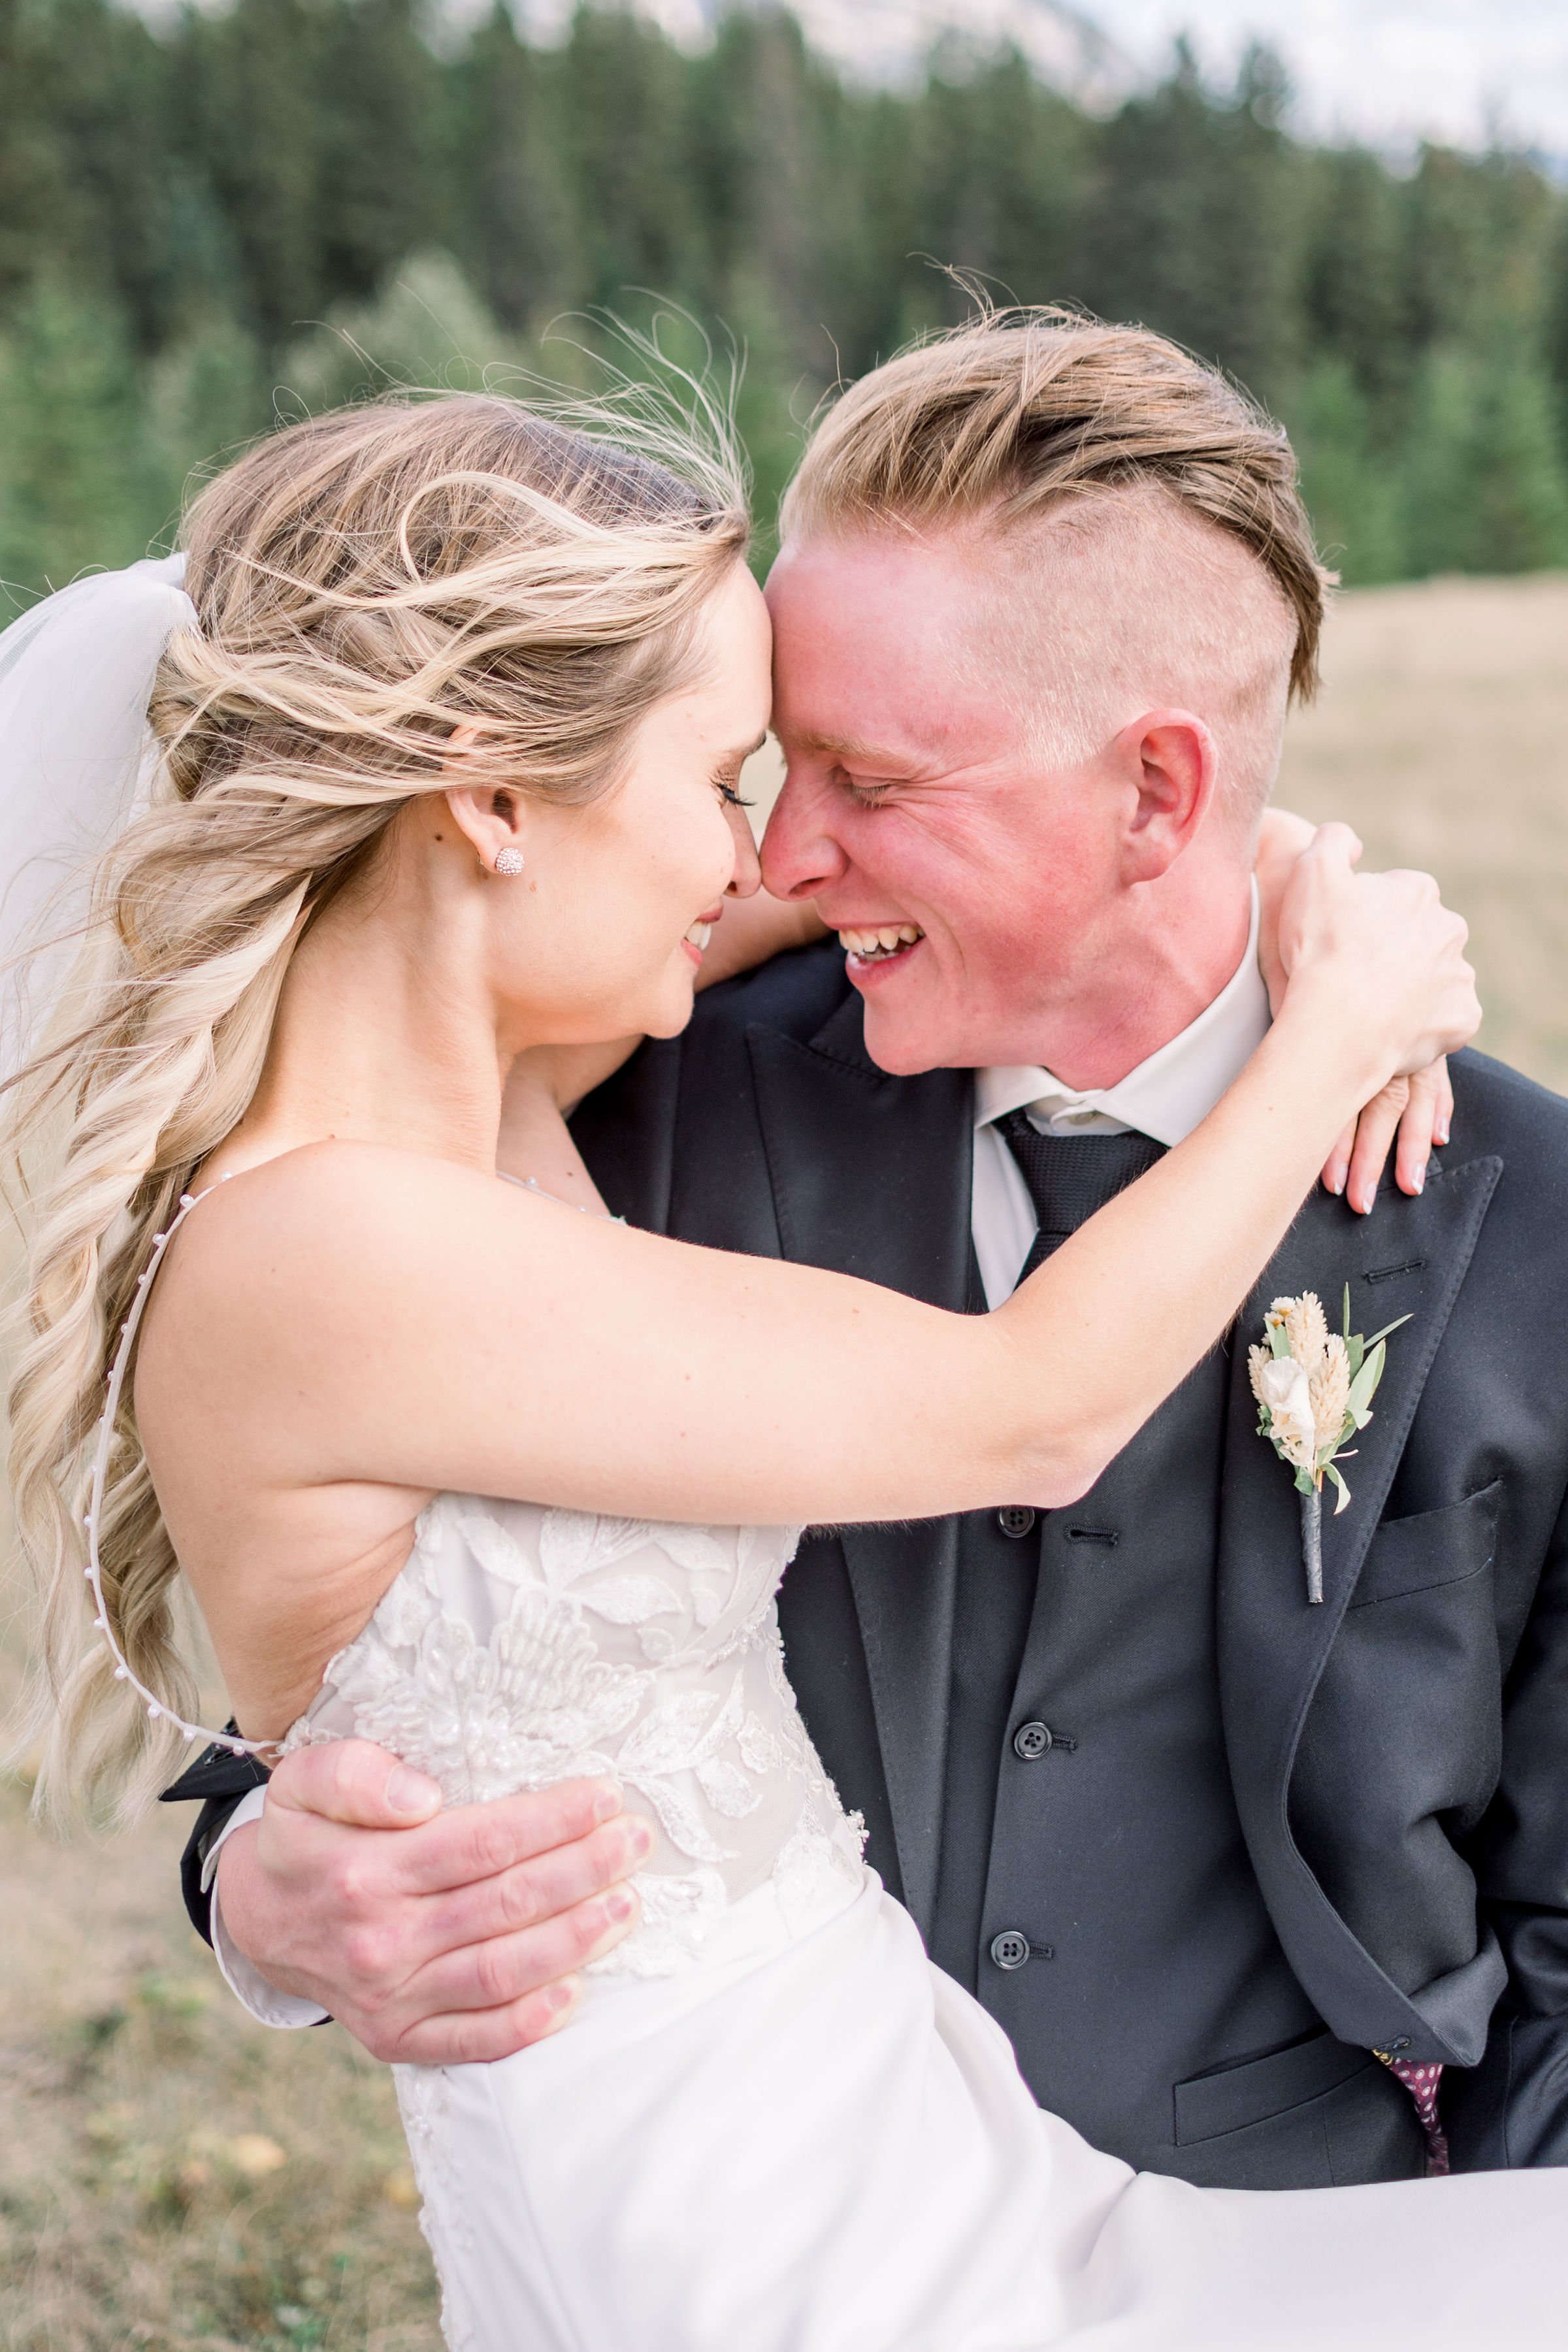  Groom holds his bride in his arm and goes in for a kiss by Chelsea Mason Photography. outdoor weddings wedding goals #Albertaweddings #shesaidyes #Albertaweddingphotographers #SilvertipGolfCourse #ChelseaMasonPhotography #ChelseaMasonWeddings  